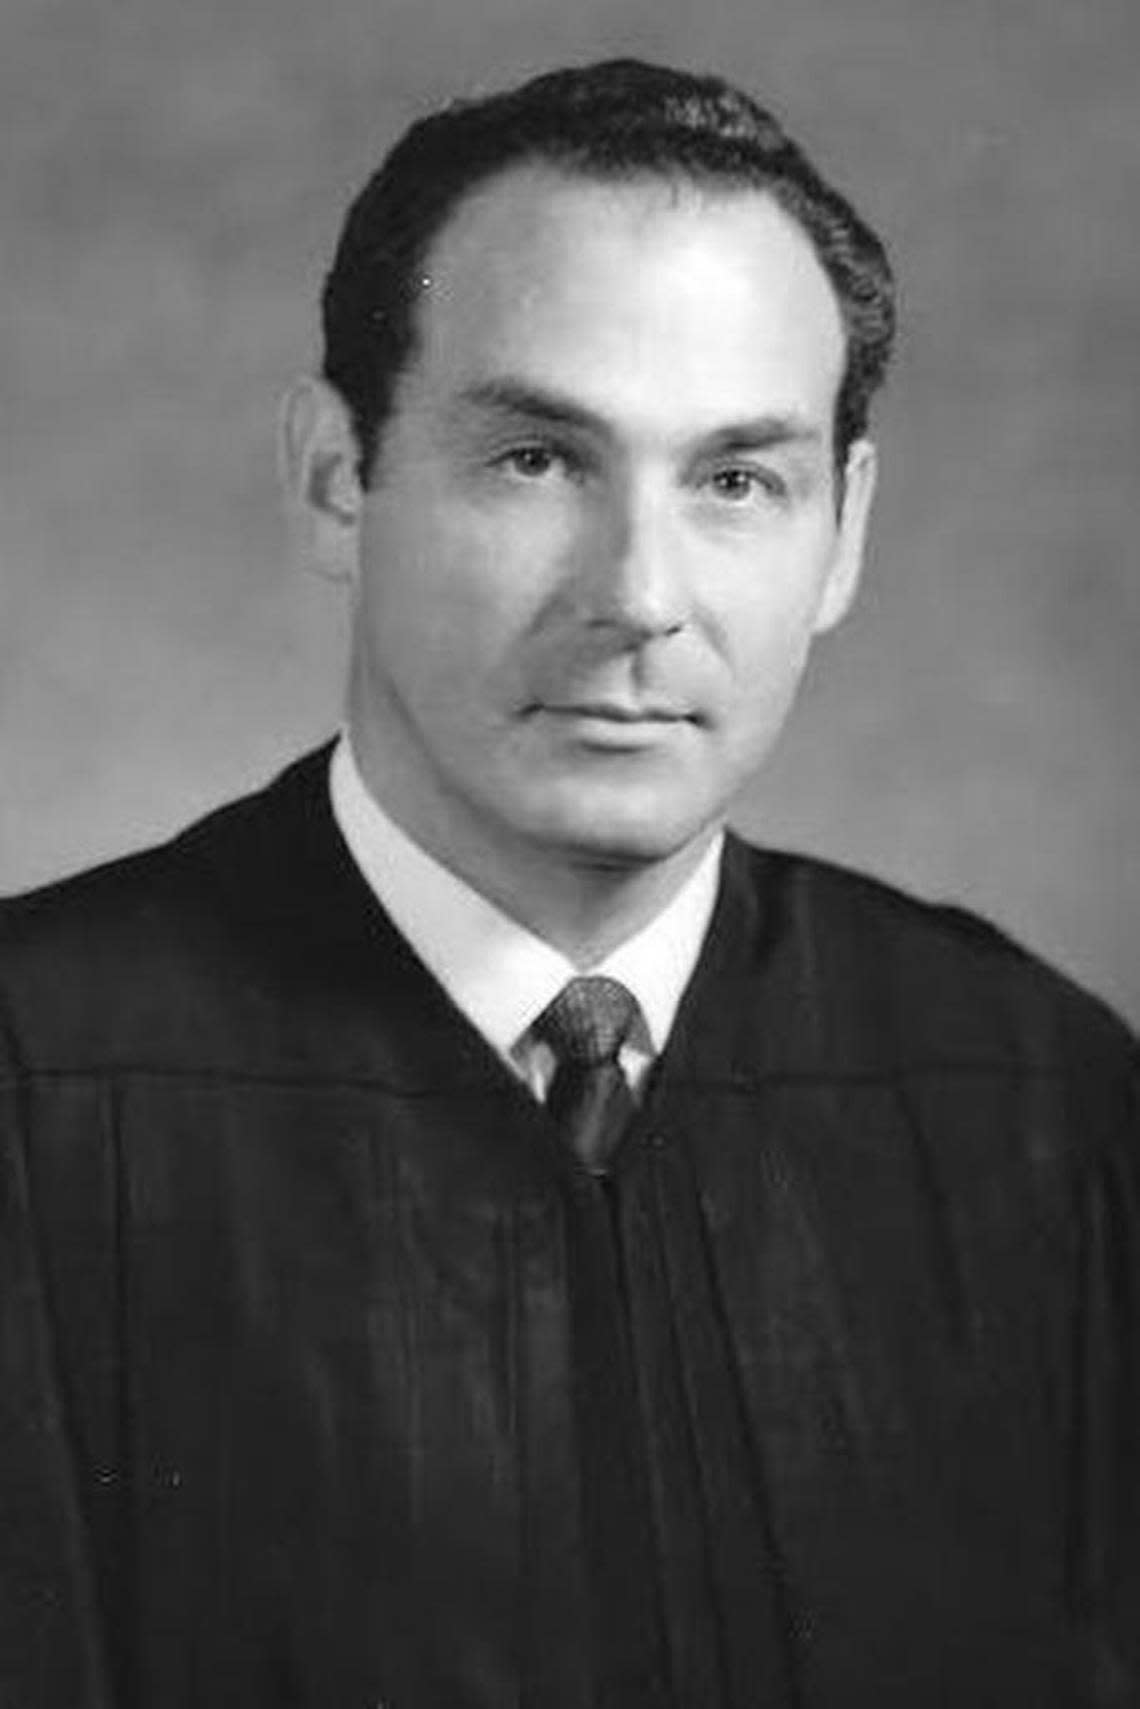 Judge Edward Klein served in the Miami-Dade circuit court from 1973 to 1992. He died in 2017. A Miami Beach Senior High grad, he briefly dated fellow student Barbara Walters in the 1940s.